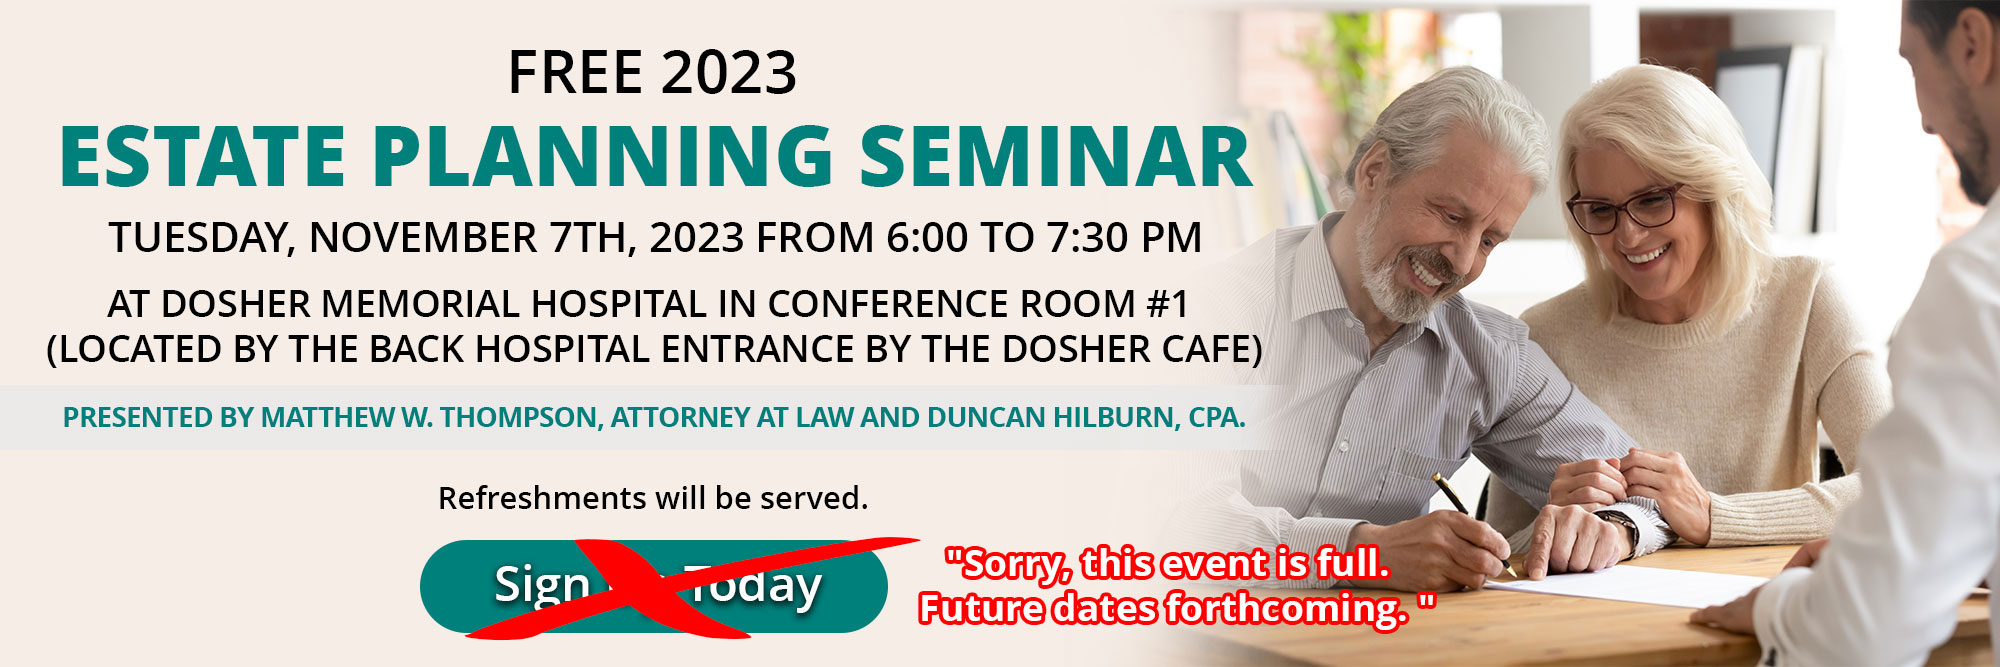 Free 2023 Estate Planning Seminar

Tuesday, November 7th, 2023 from 6:00 to 7:30 pm

at Dosher Memorial Hospital in Conference Room #1 
(located by the back hospital entrance by the Dosher Cafe)

Sign Up Today!